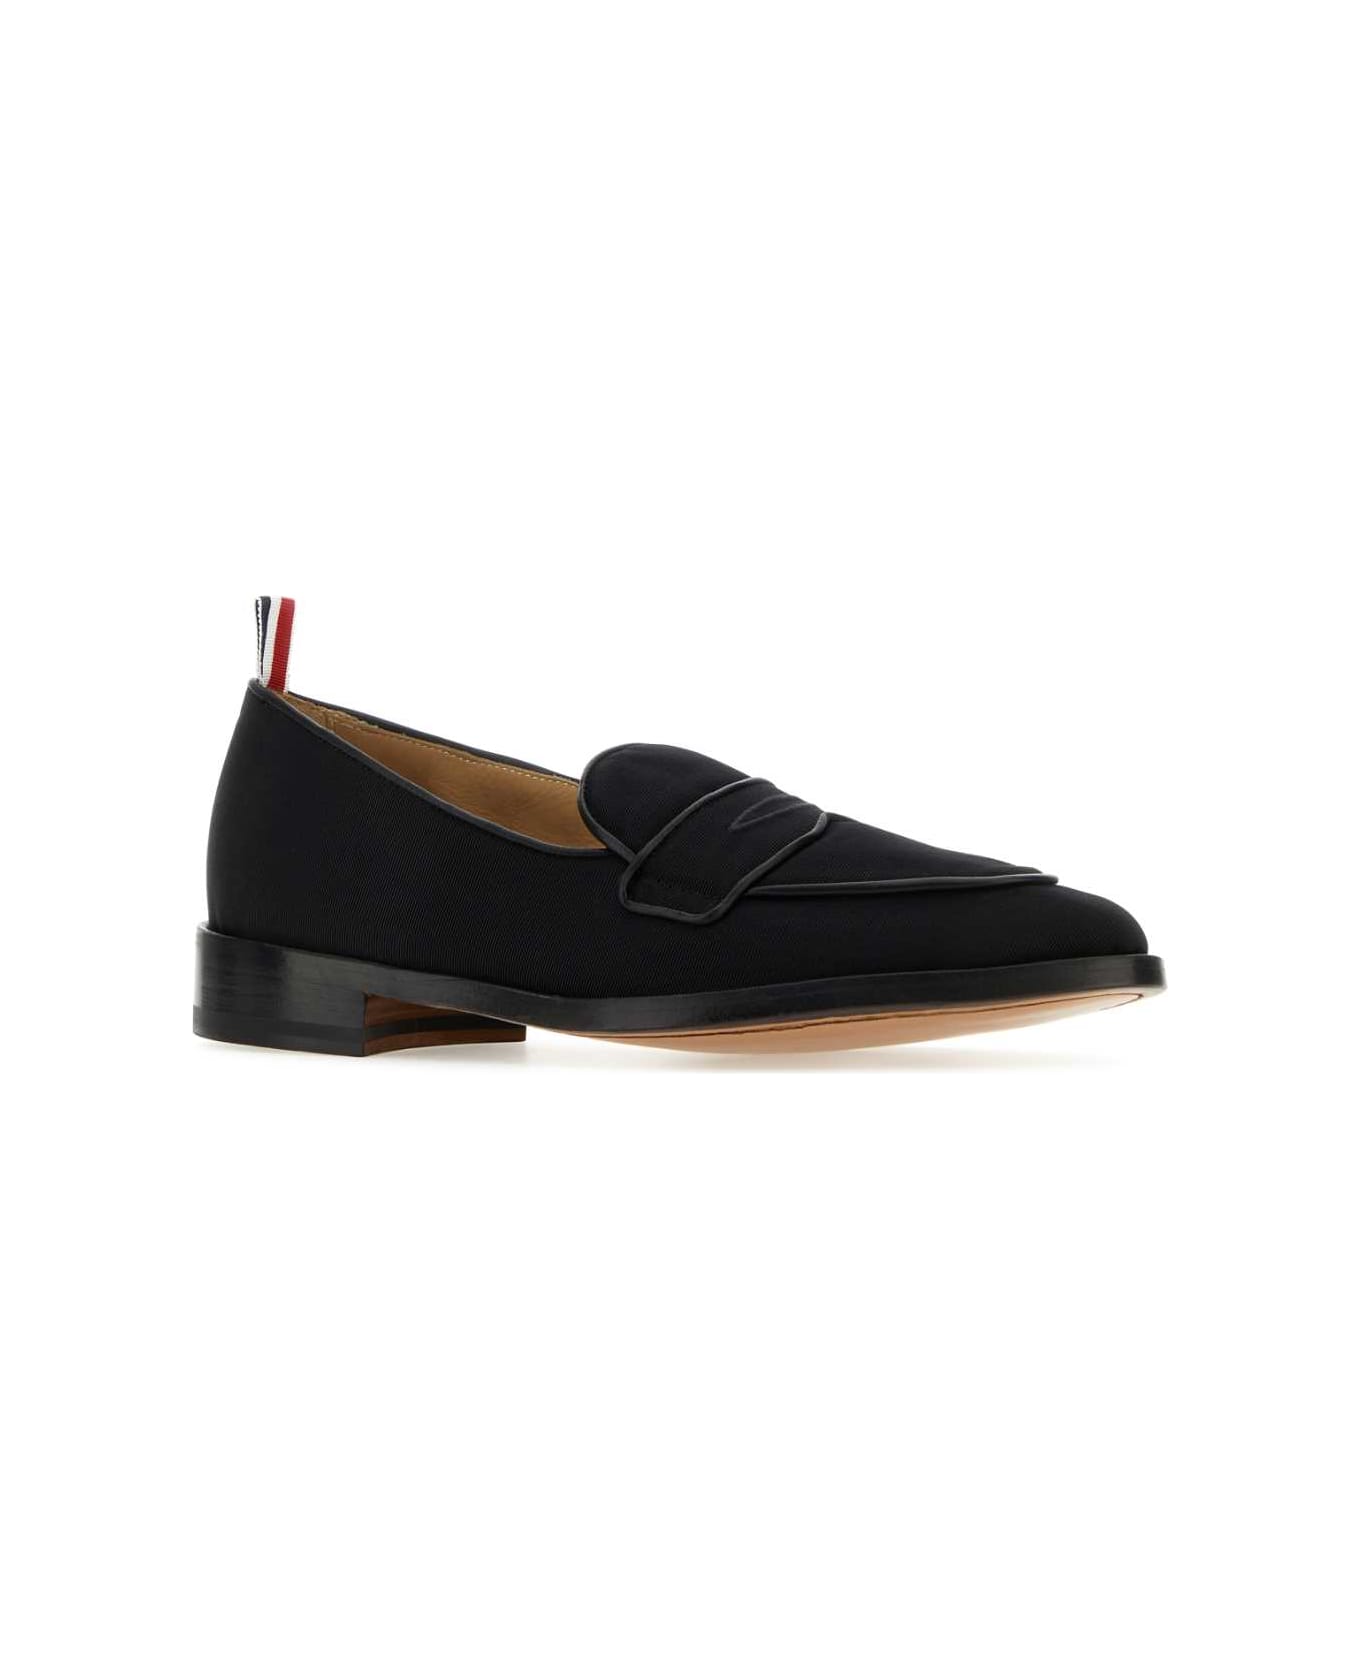 Thom Browne Midnight Blue Fabric Loafers - Black